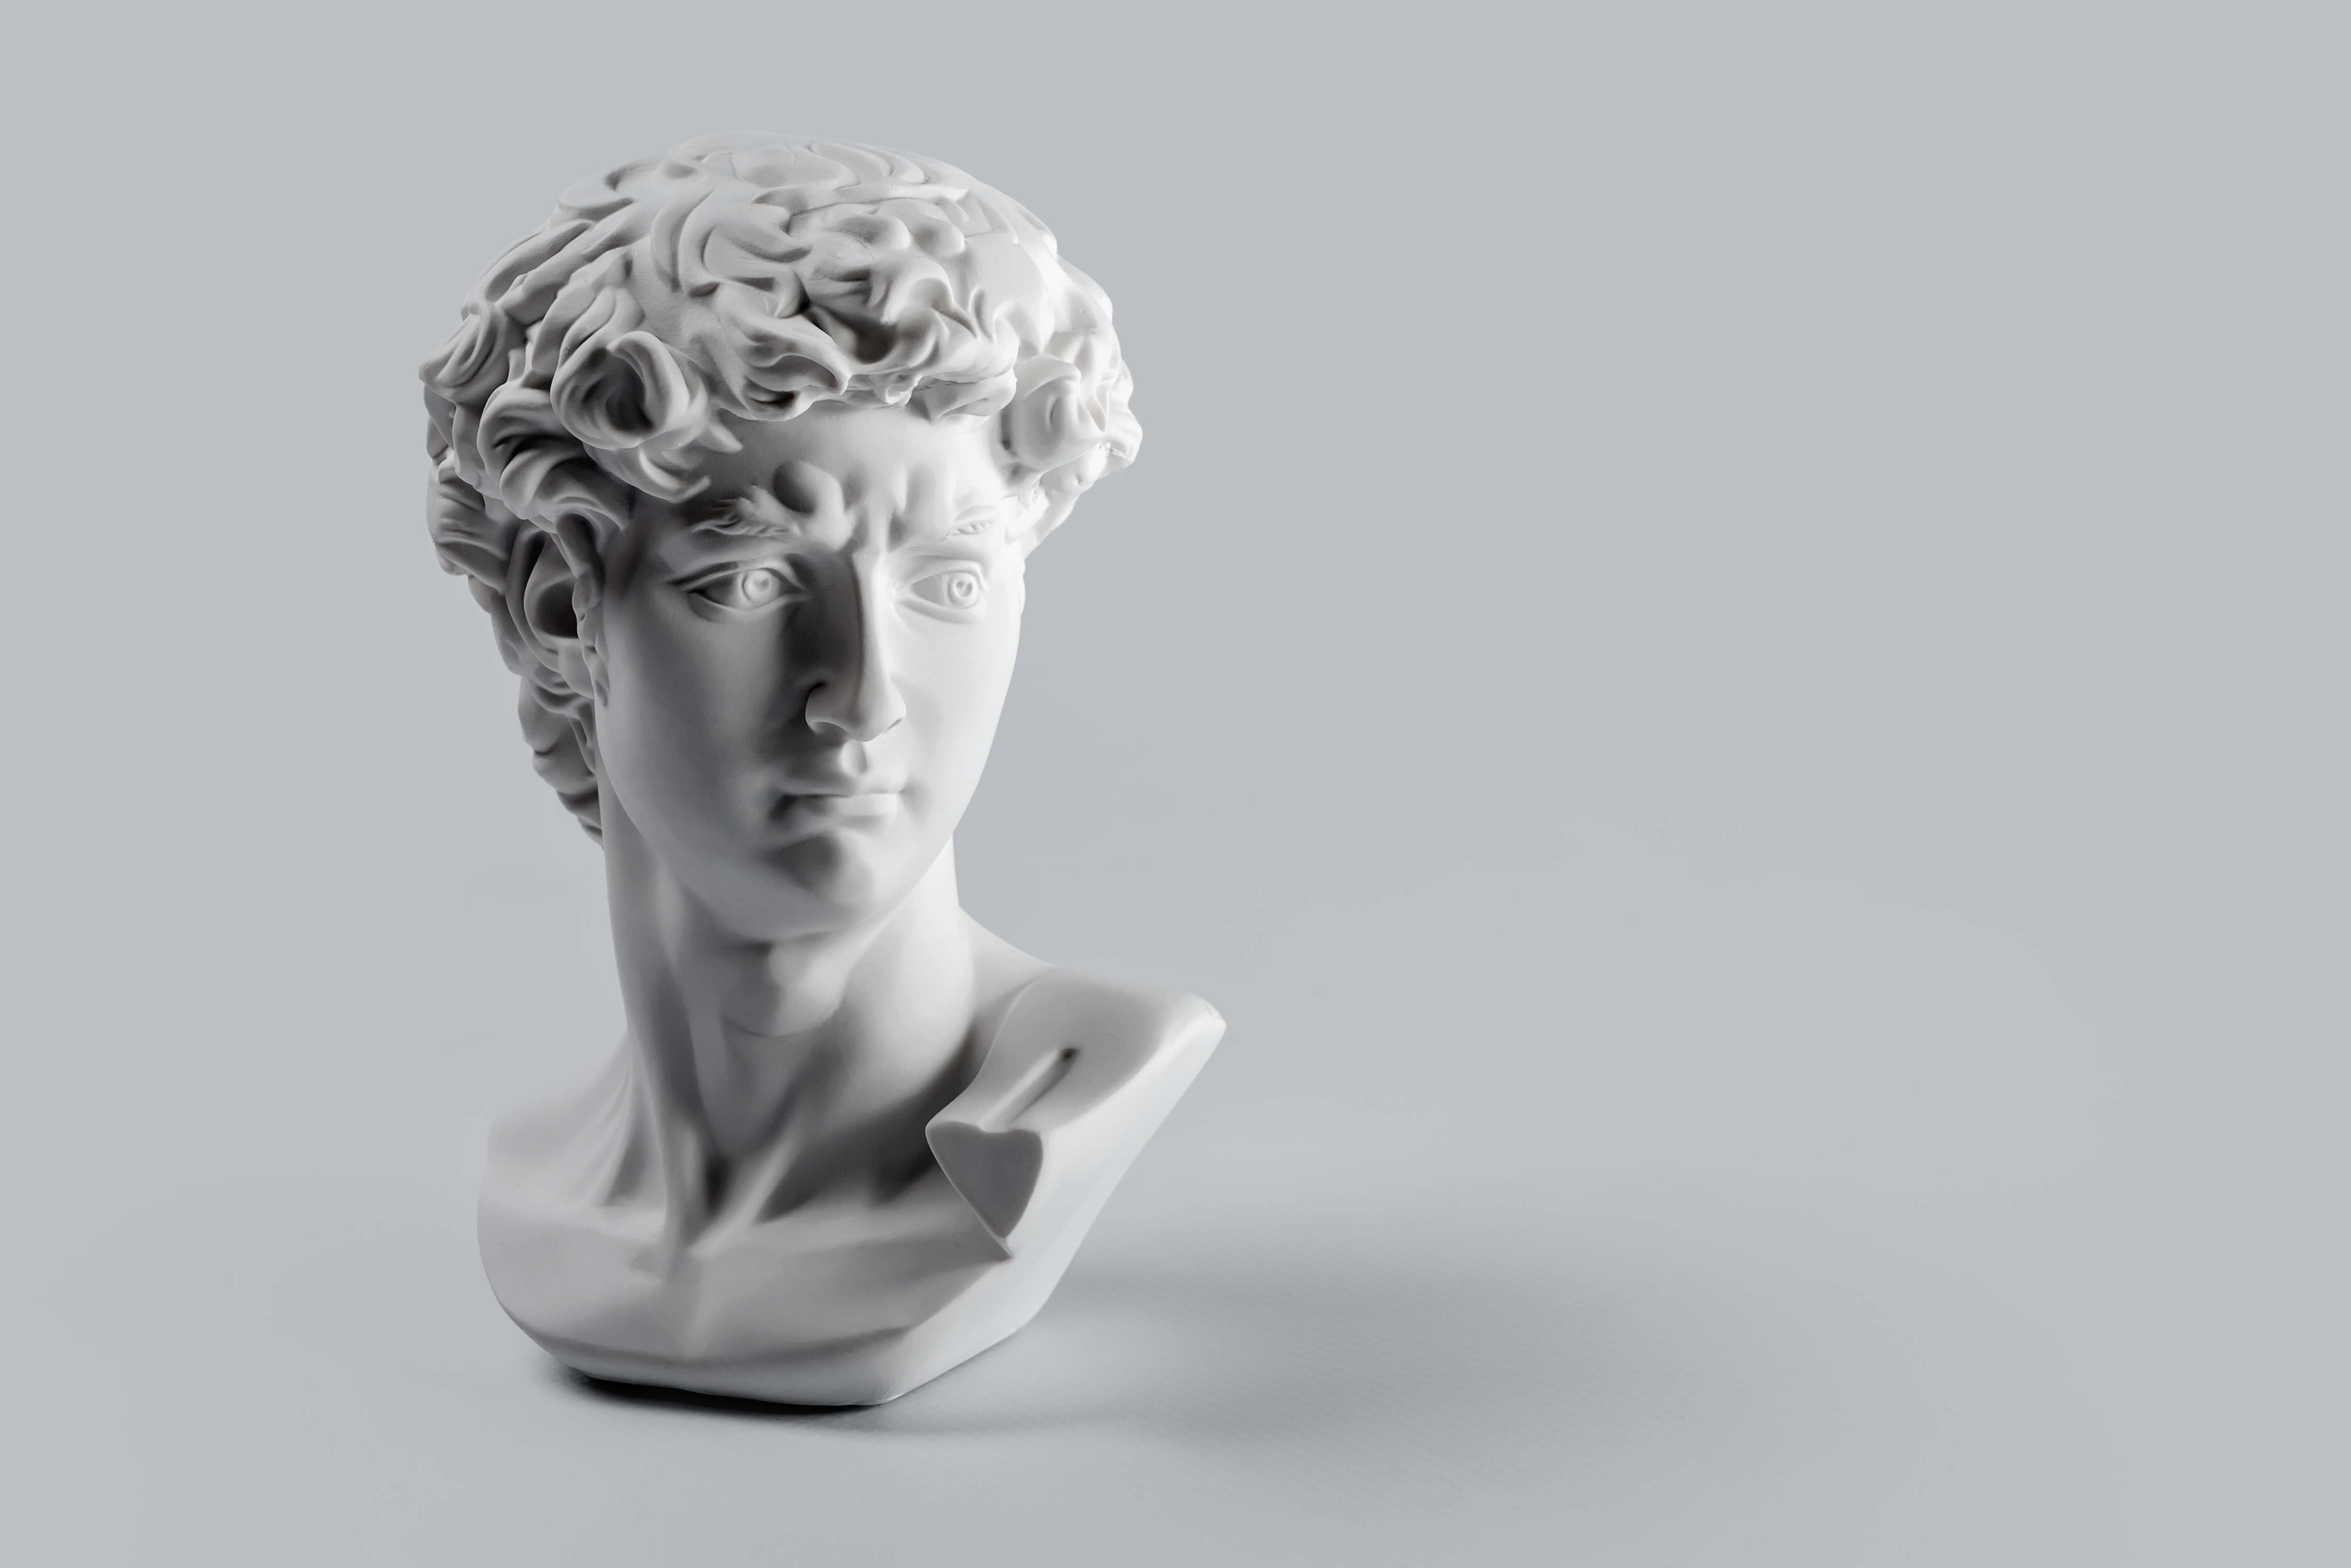 Gypsum statue of David&#039;s head. Michelangelo&#039;s David statue plaster copy on grey background with copyspace for text. Ancient greek sculpture, statue of hero.